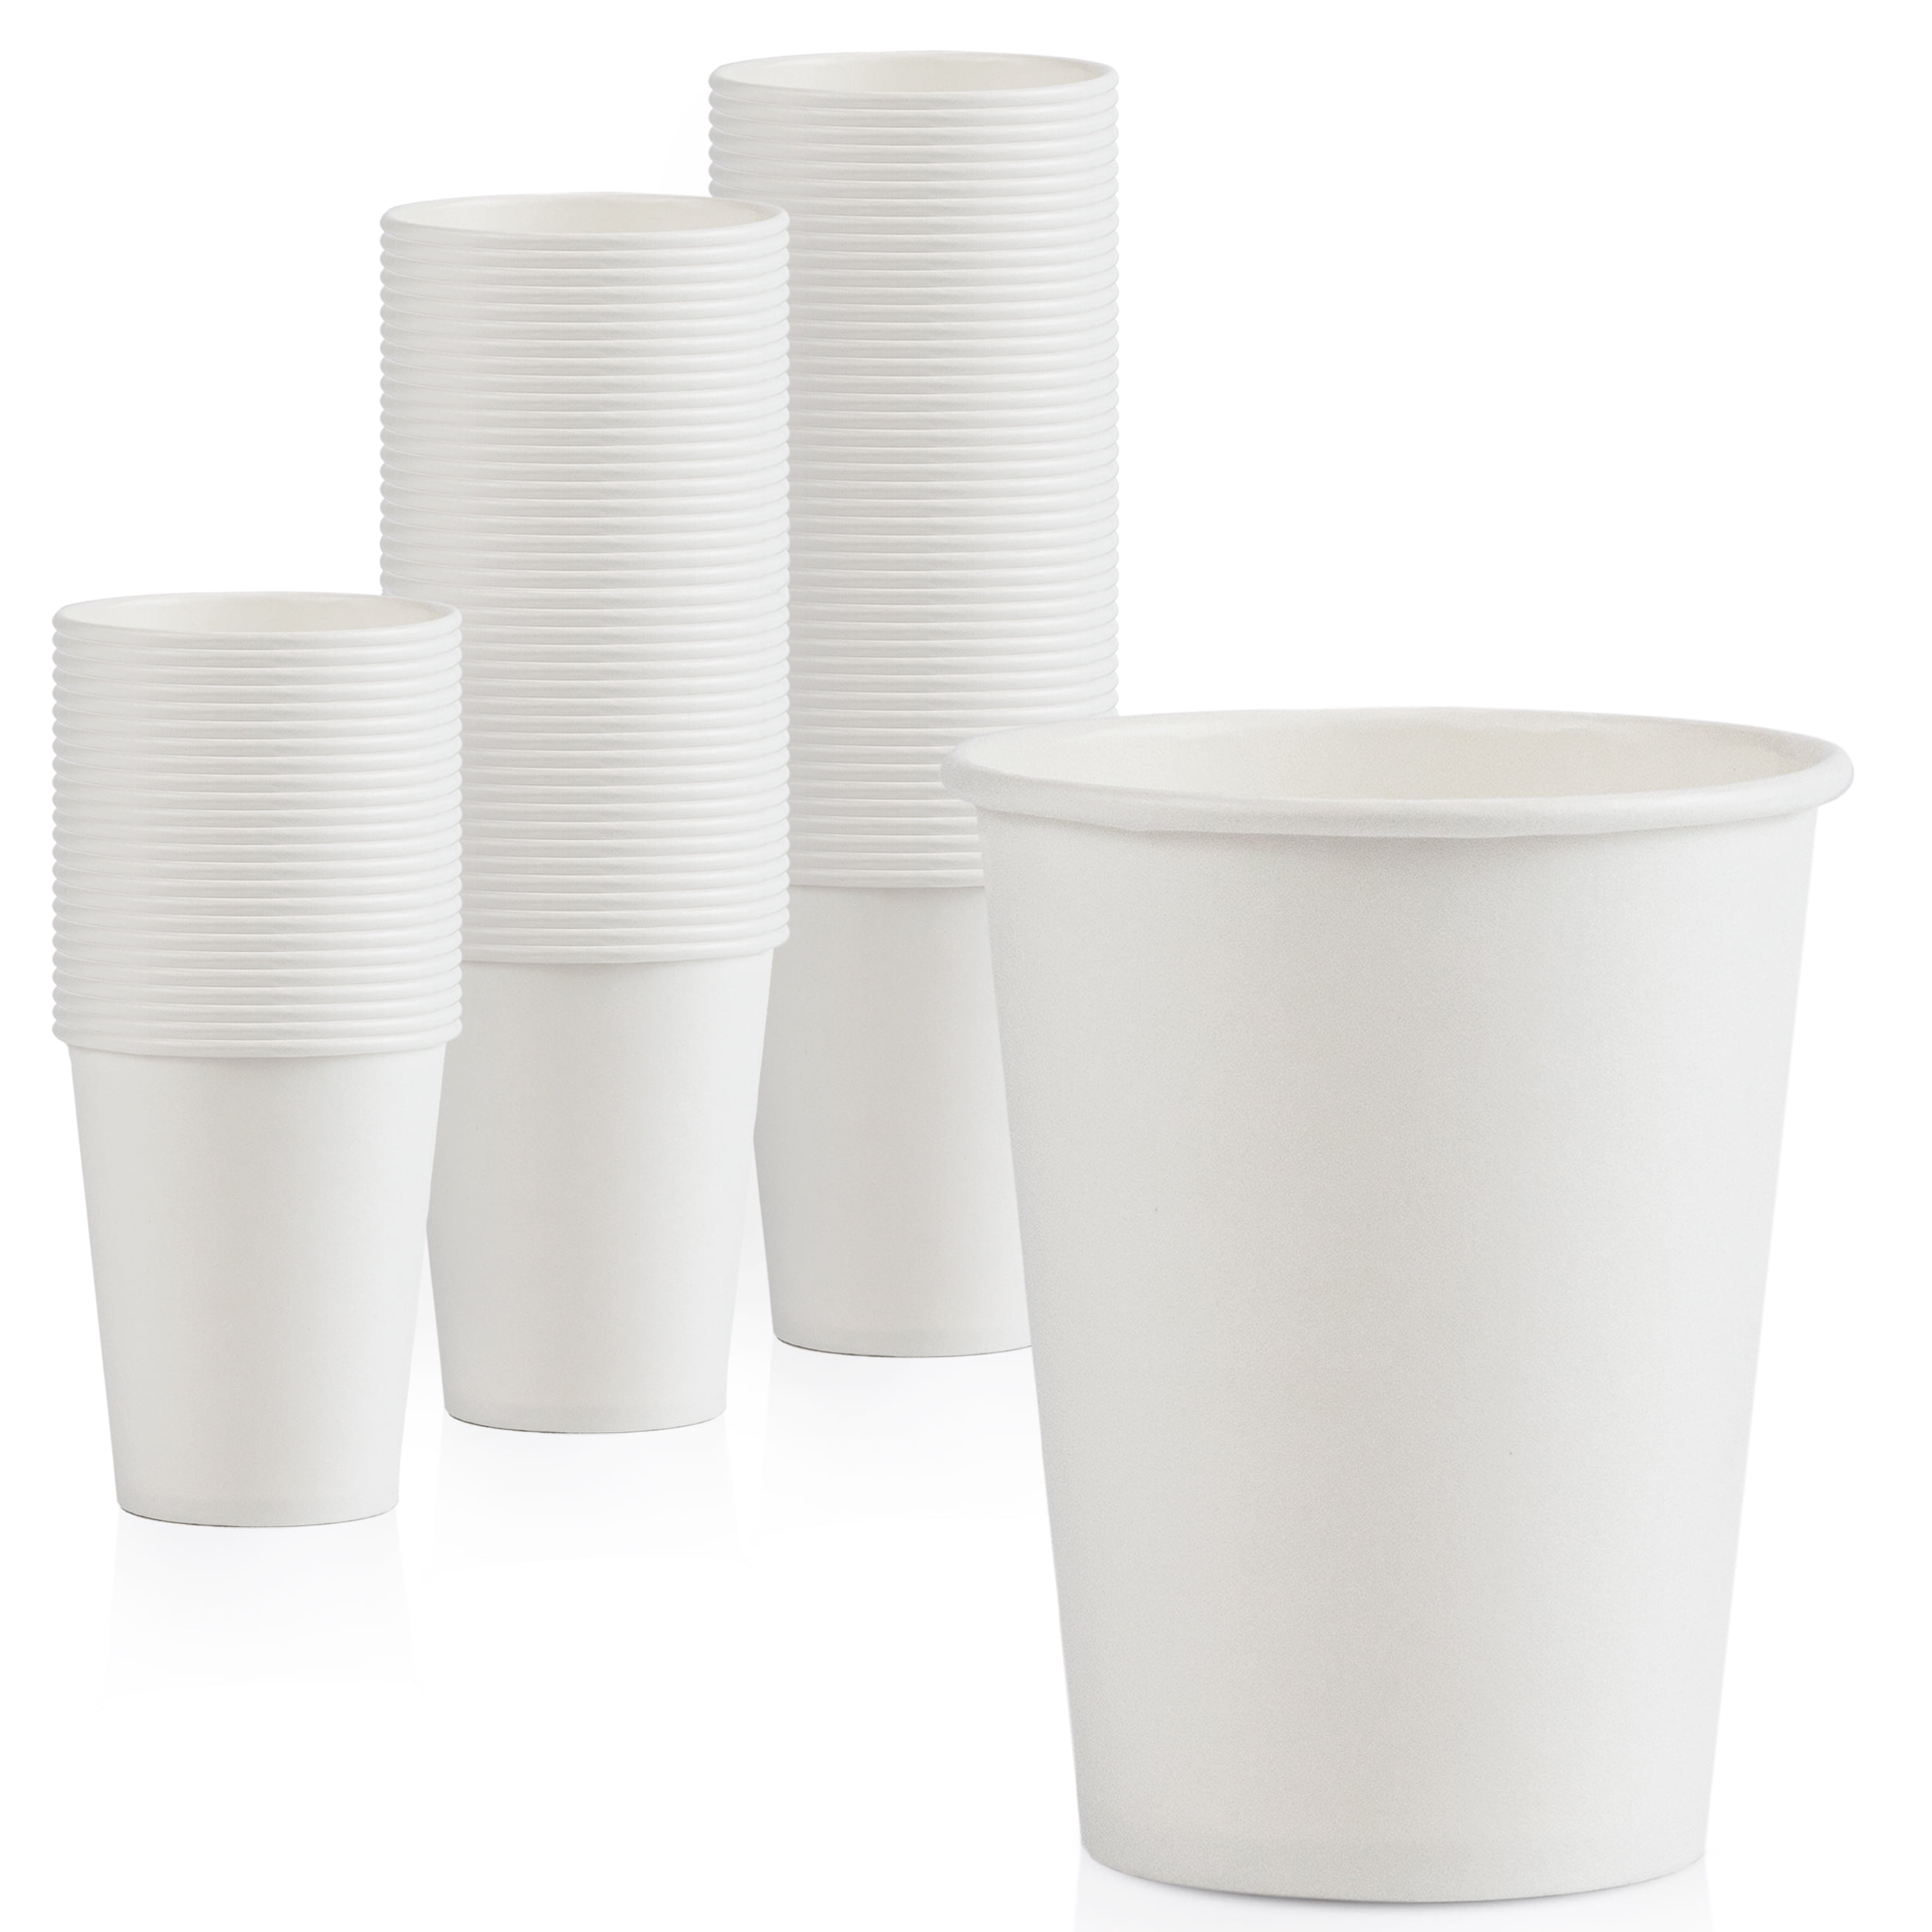 50pcs/cups 8oz Disposable Coffee White Paper Cups Single Wall Party Takeaway Tea 